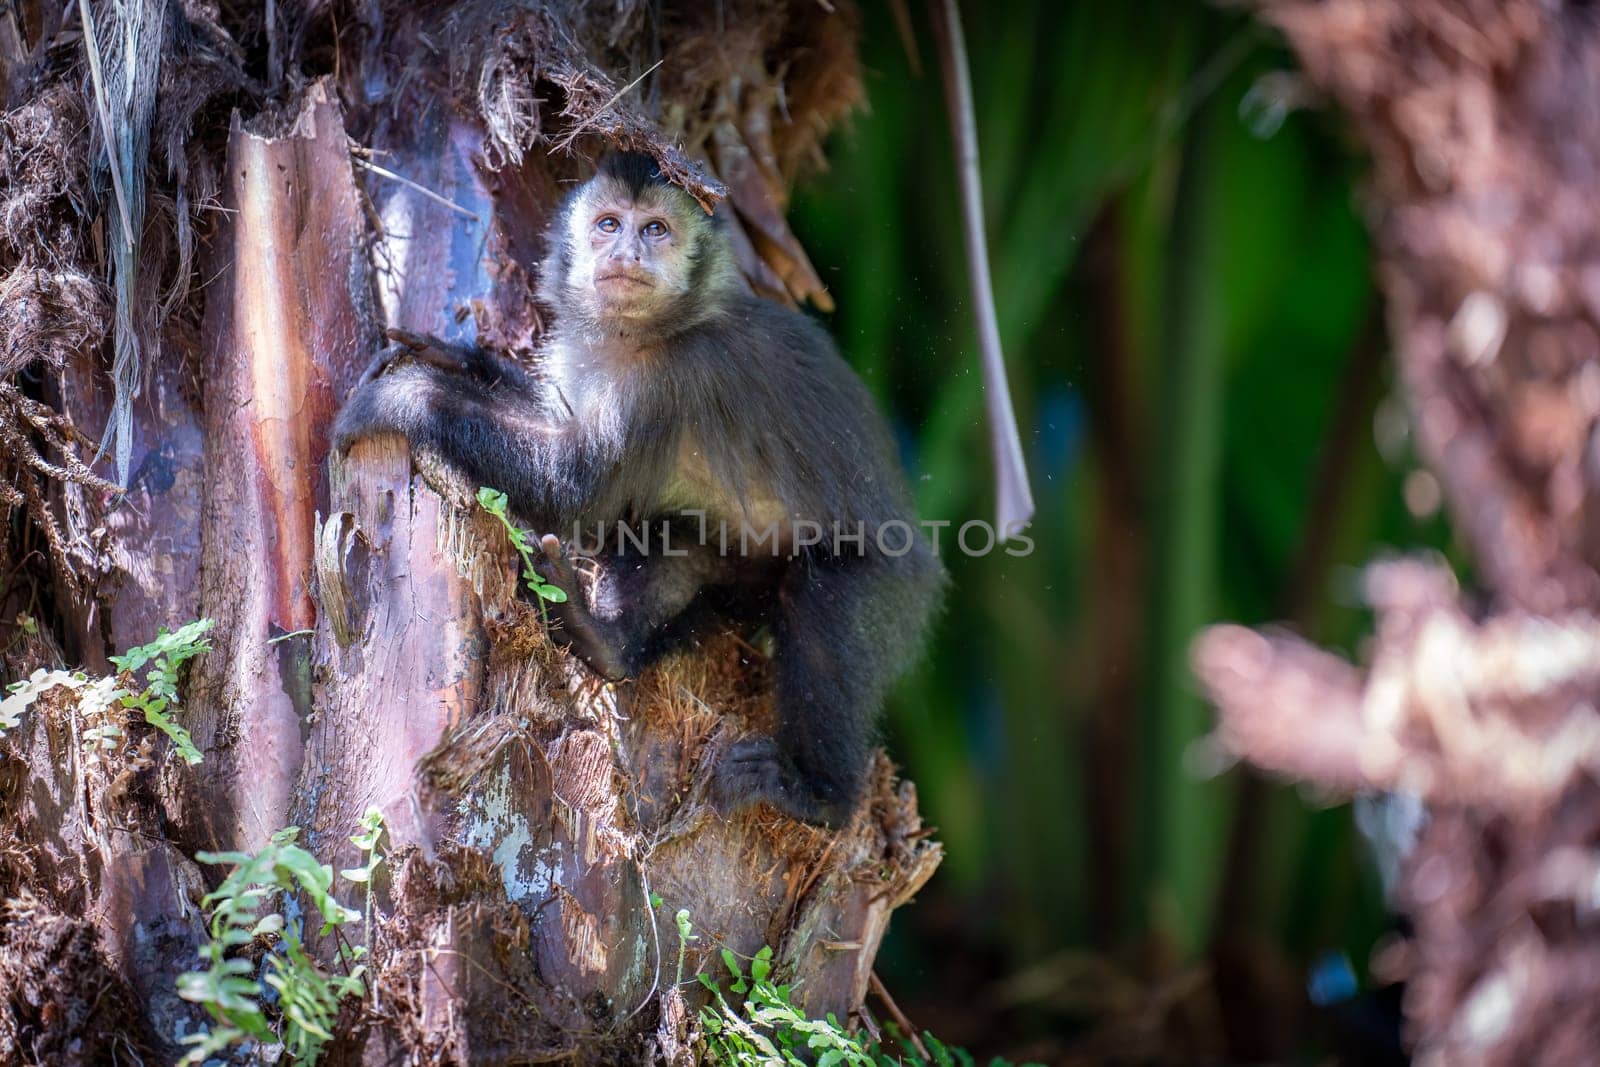 Macaque Embraces Tree Trunk Under Tropical Canopy by FerradalFCG